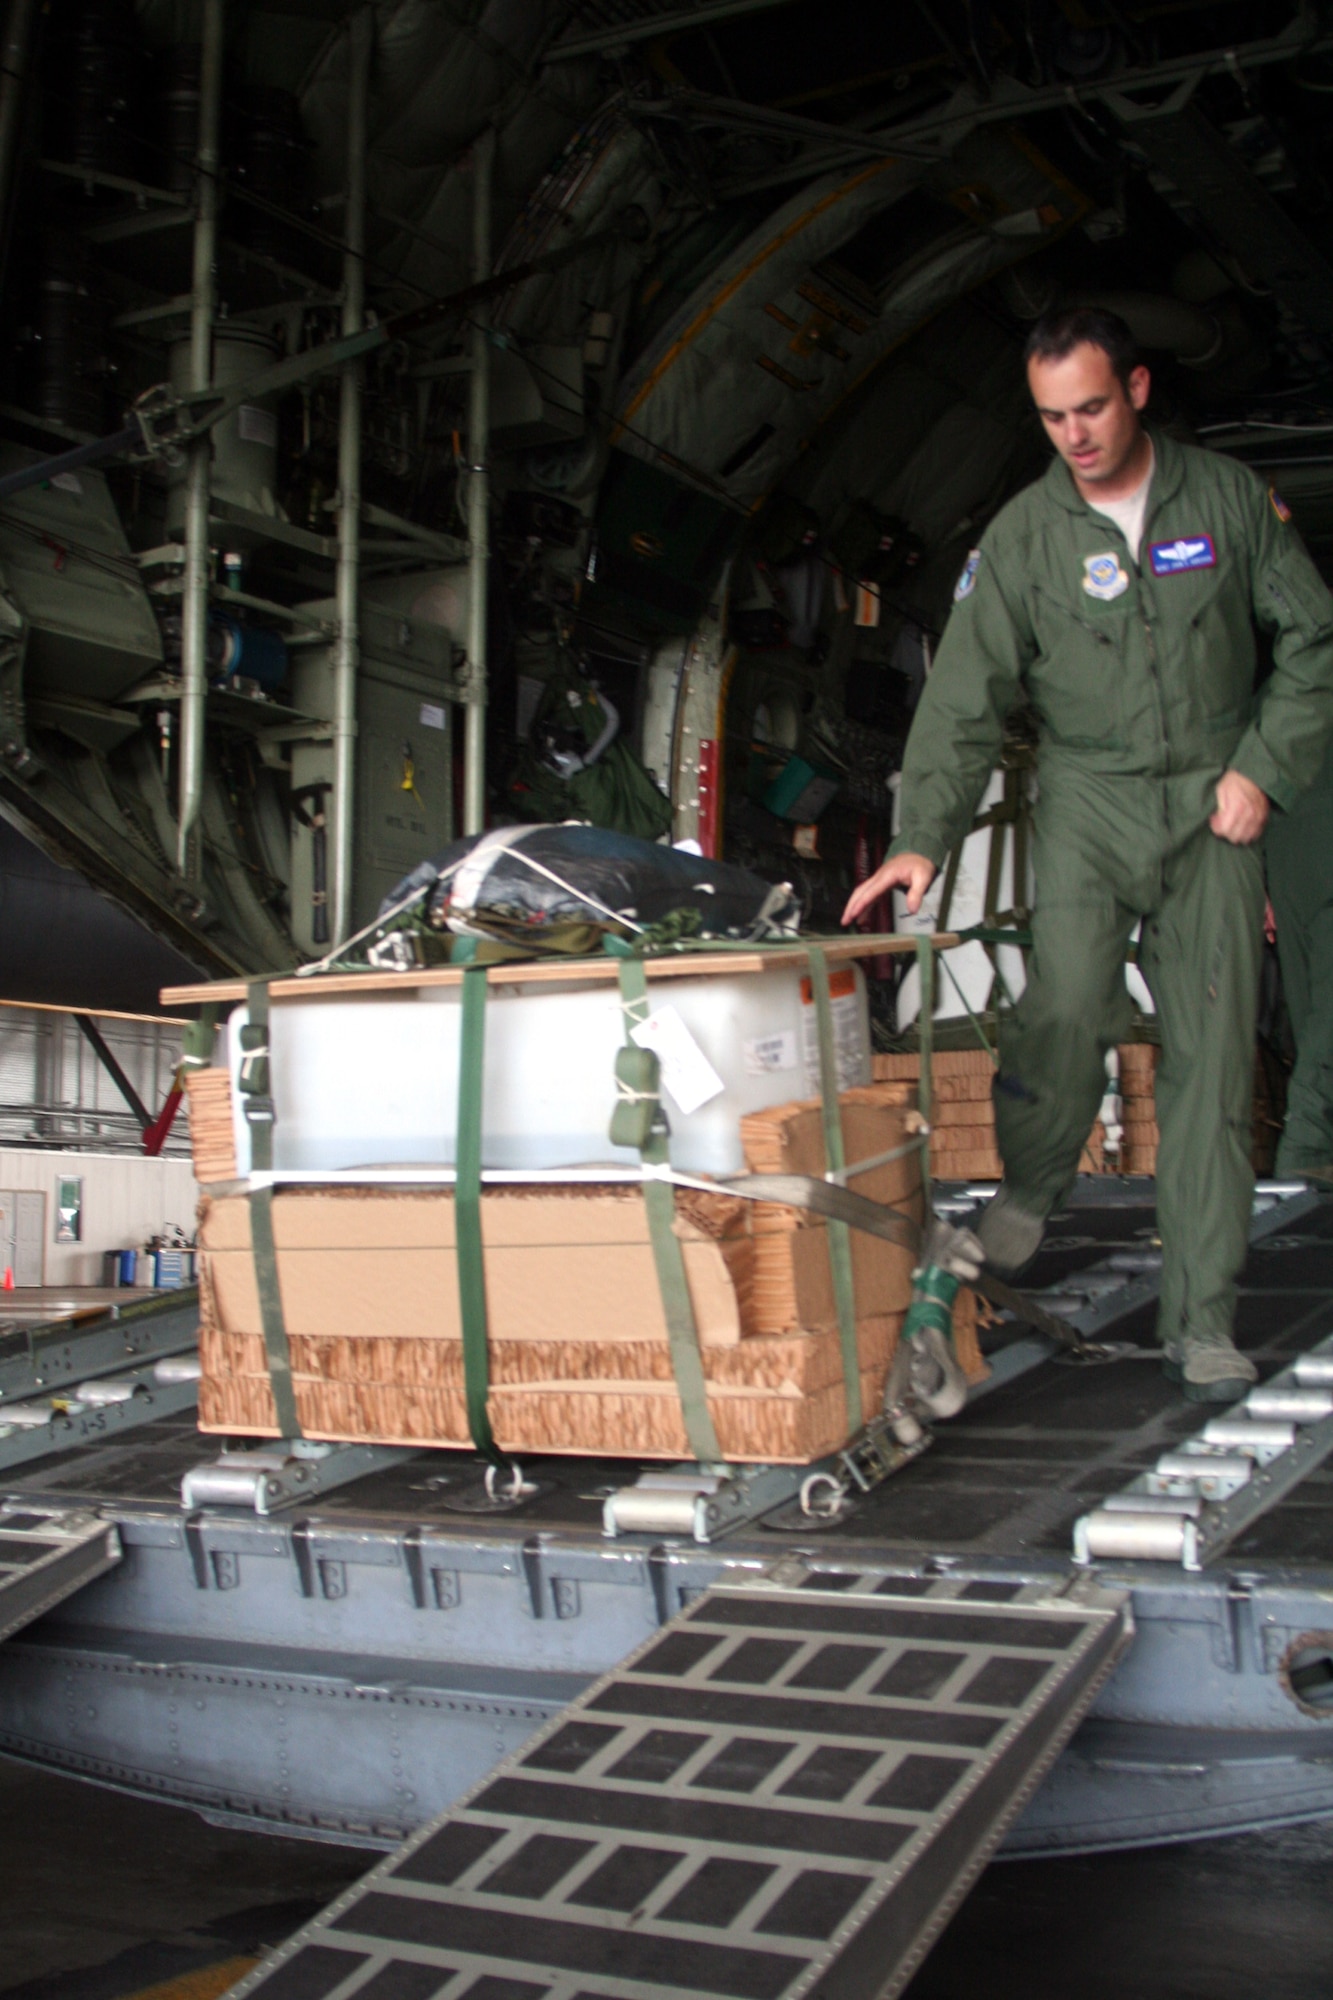 Master Sgt. John Gorsuch, C-130 Hercules loadmaster and instructor for Air Mobility Command's Detachment 5 at the Advanced Airlift Tactics Training Center at St. Joseph, Mo., checks the set up of an airdrop container delivery system bundle for a C-130 aircraft display at Scott Air Force Base, Ill., on Aug. 20, 2010. (U.S. Air Force Photo/Master Sgt. Scott T. Sturkol)